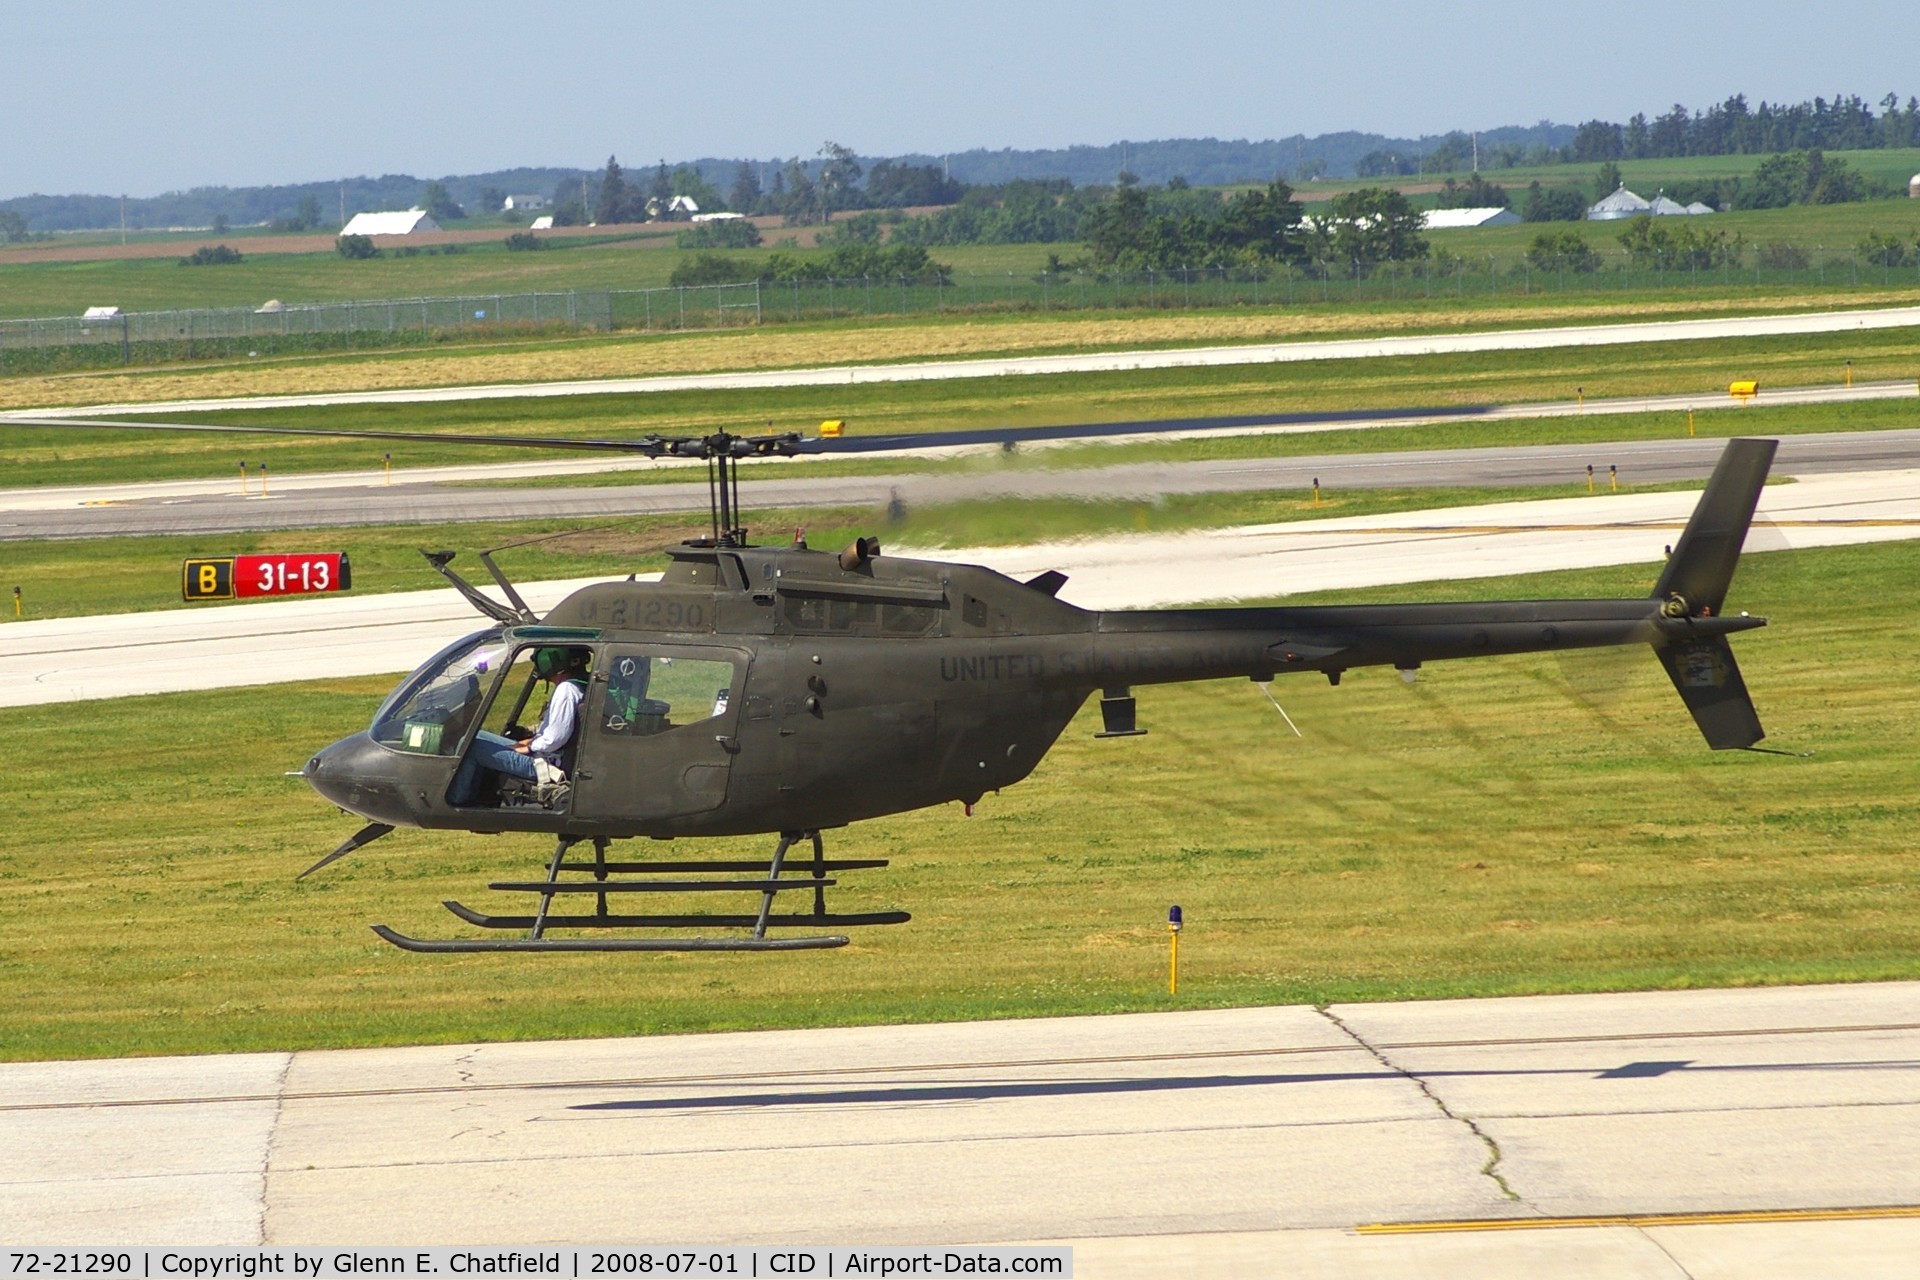 72-21290, 1972 Bell OH-58C Kiowa C/N 41956, Taken from second floor window of the control tower